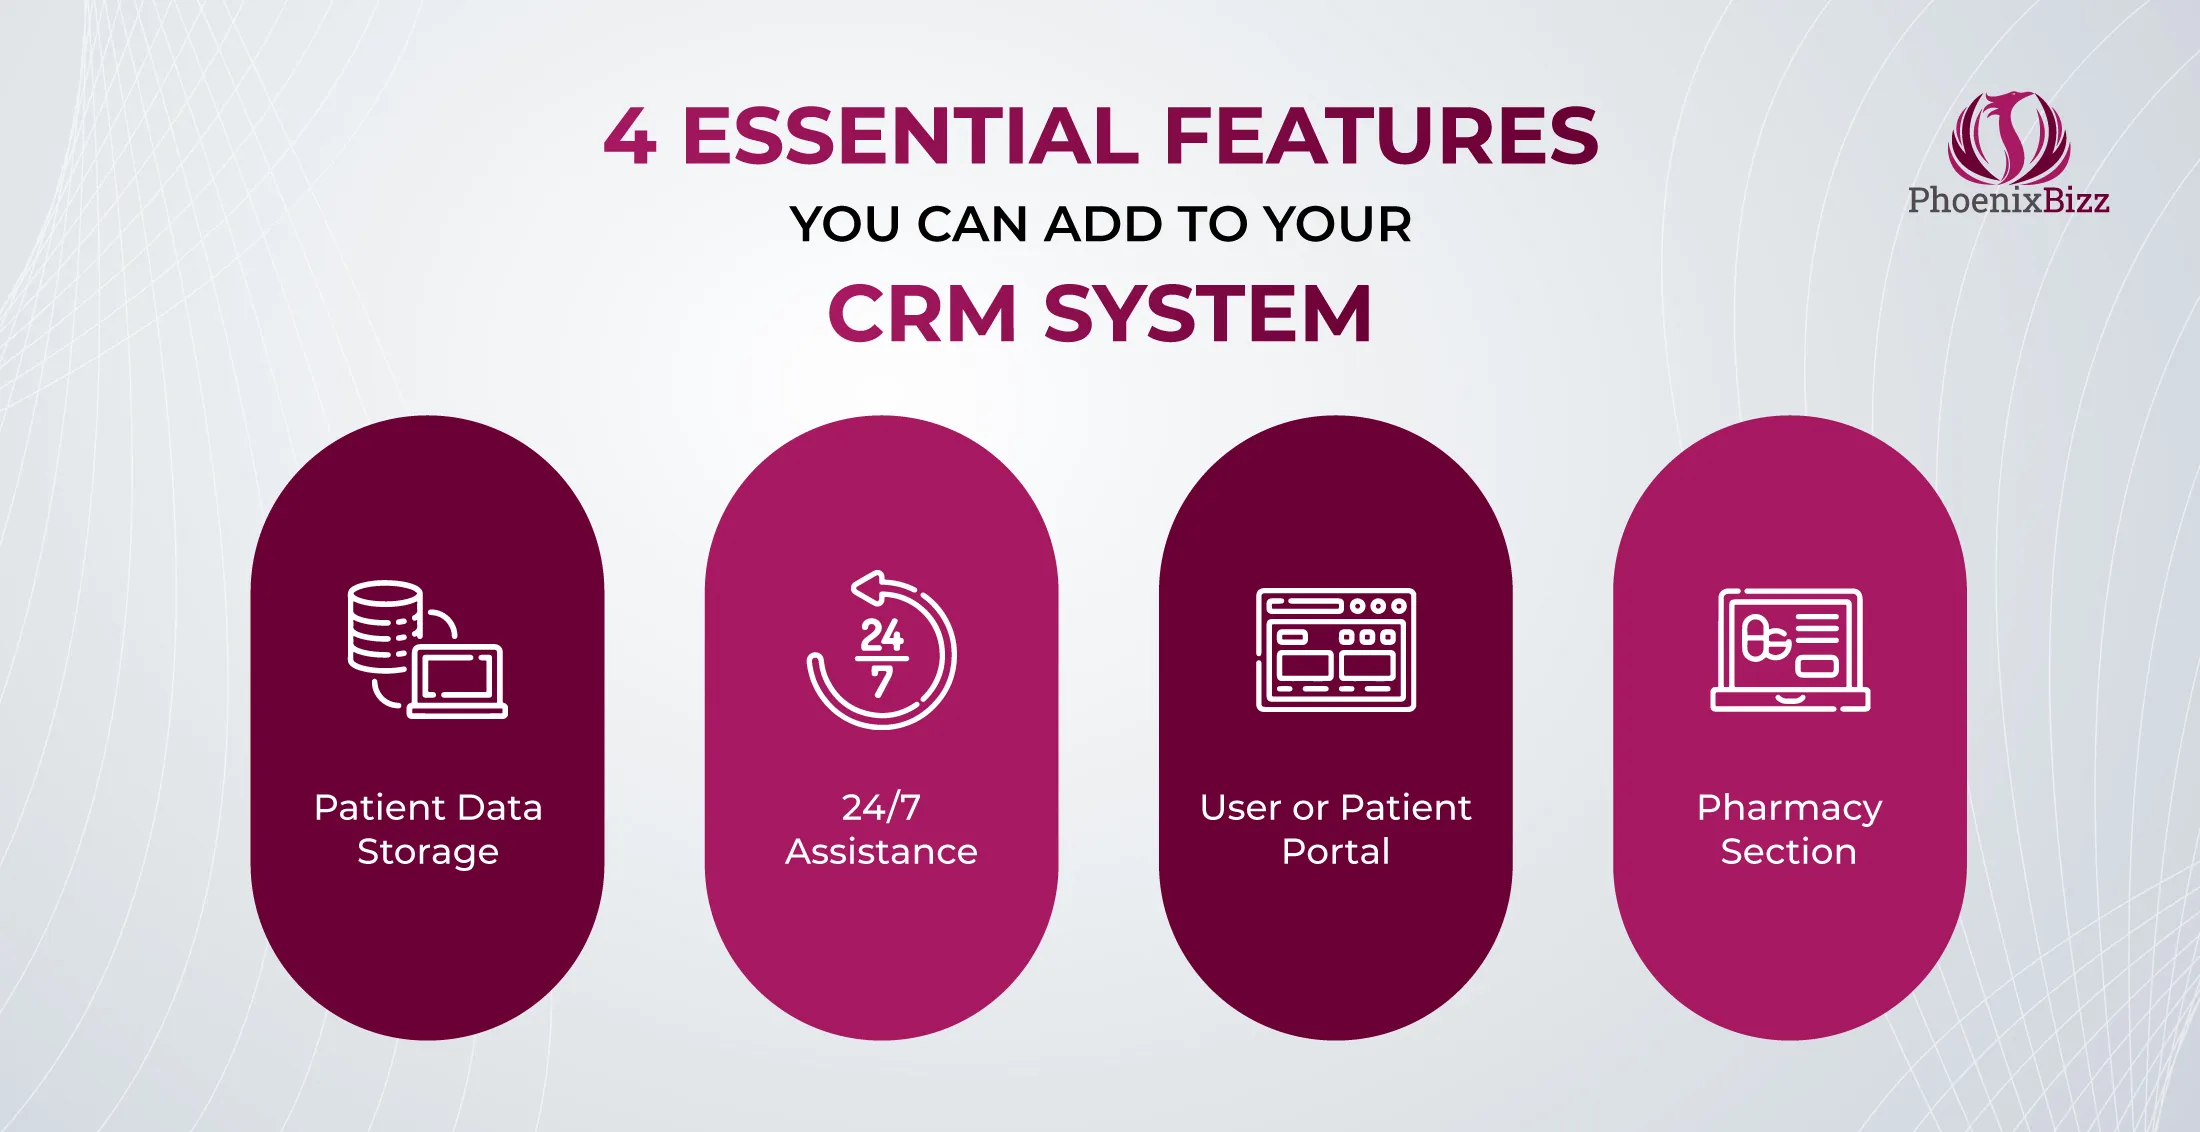 Essential features you can add to your CRM Software